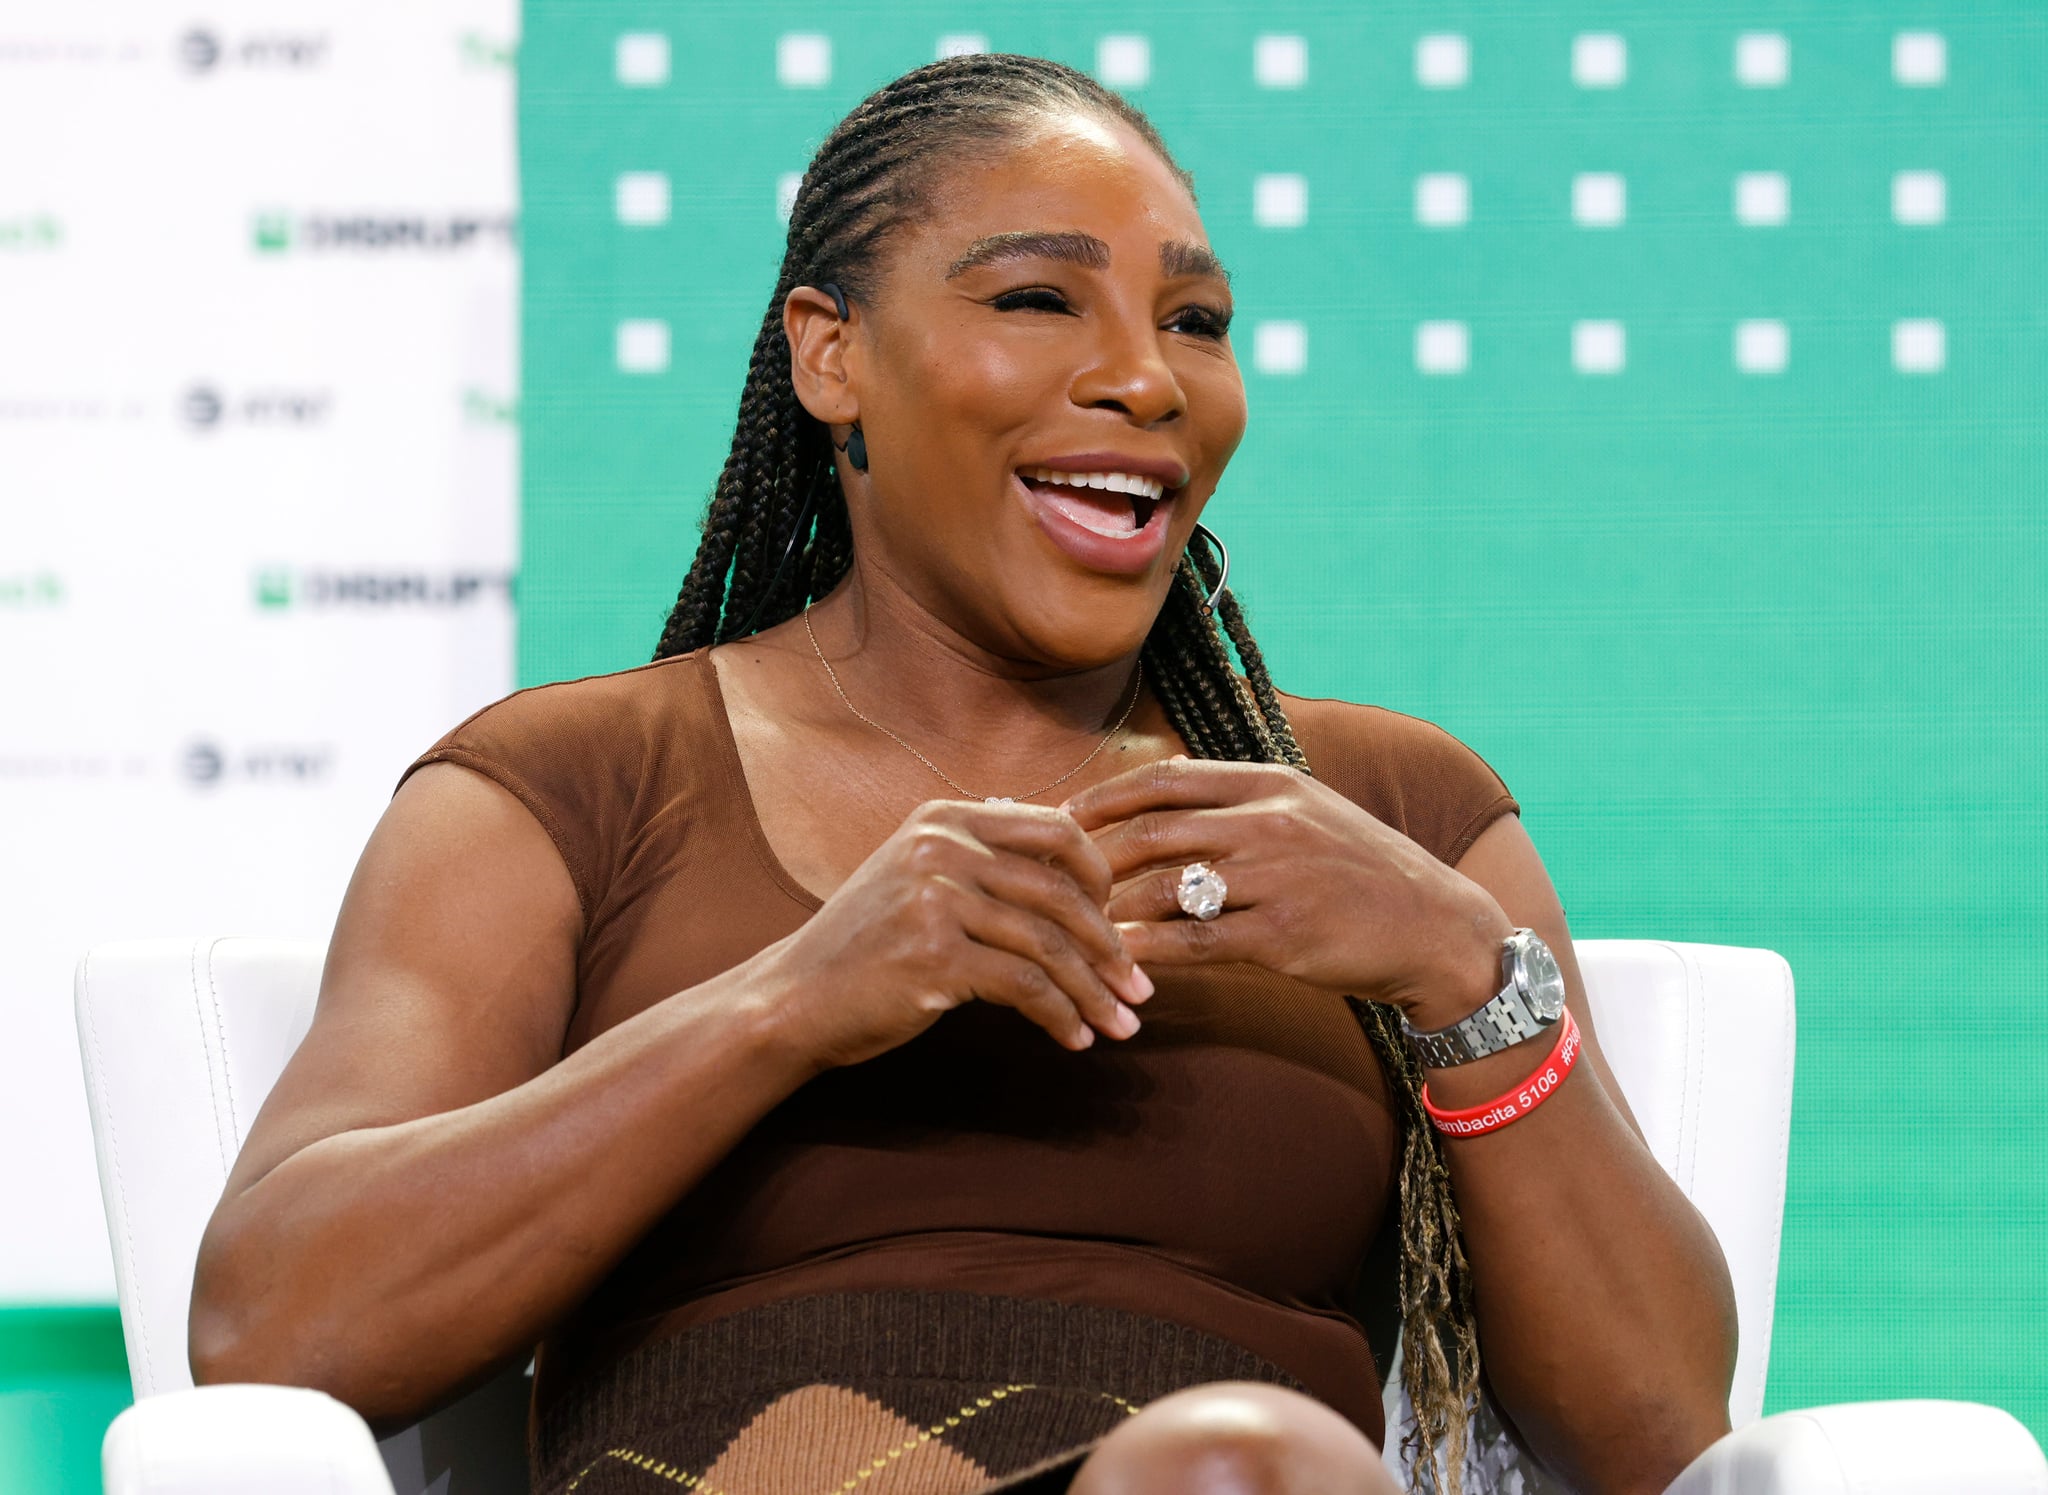 SAN FRANCISCO, CALIFORNIA - OCTOBER 19: Founding & Managing Partner of Serena Ventures Serena Williams speaks onstage during TechCrunch Disrupt 2022 on October 19, 2022 in San Francisco, California. (Photo by Kimberly White/Getty Images for TechCrunch)